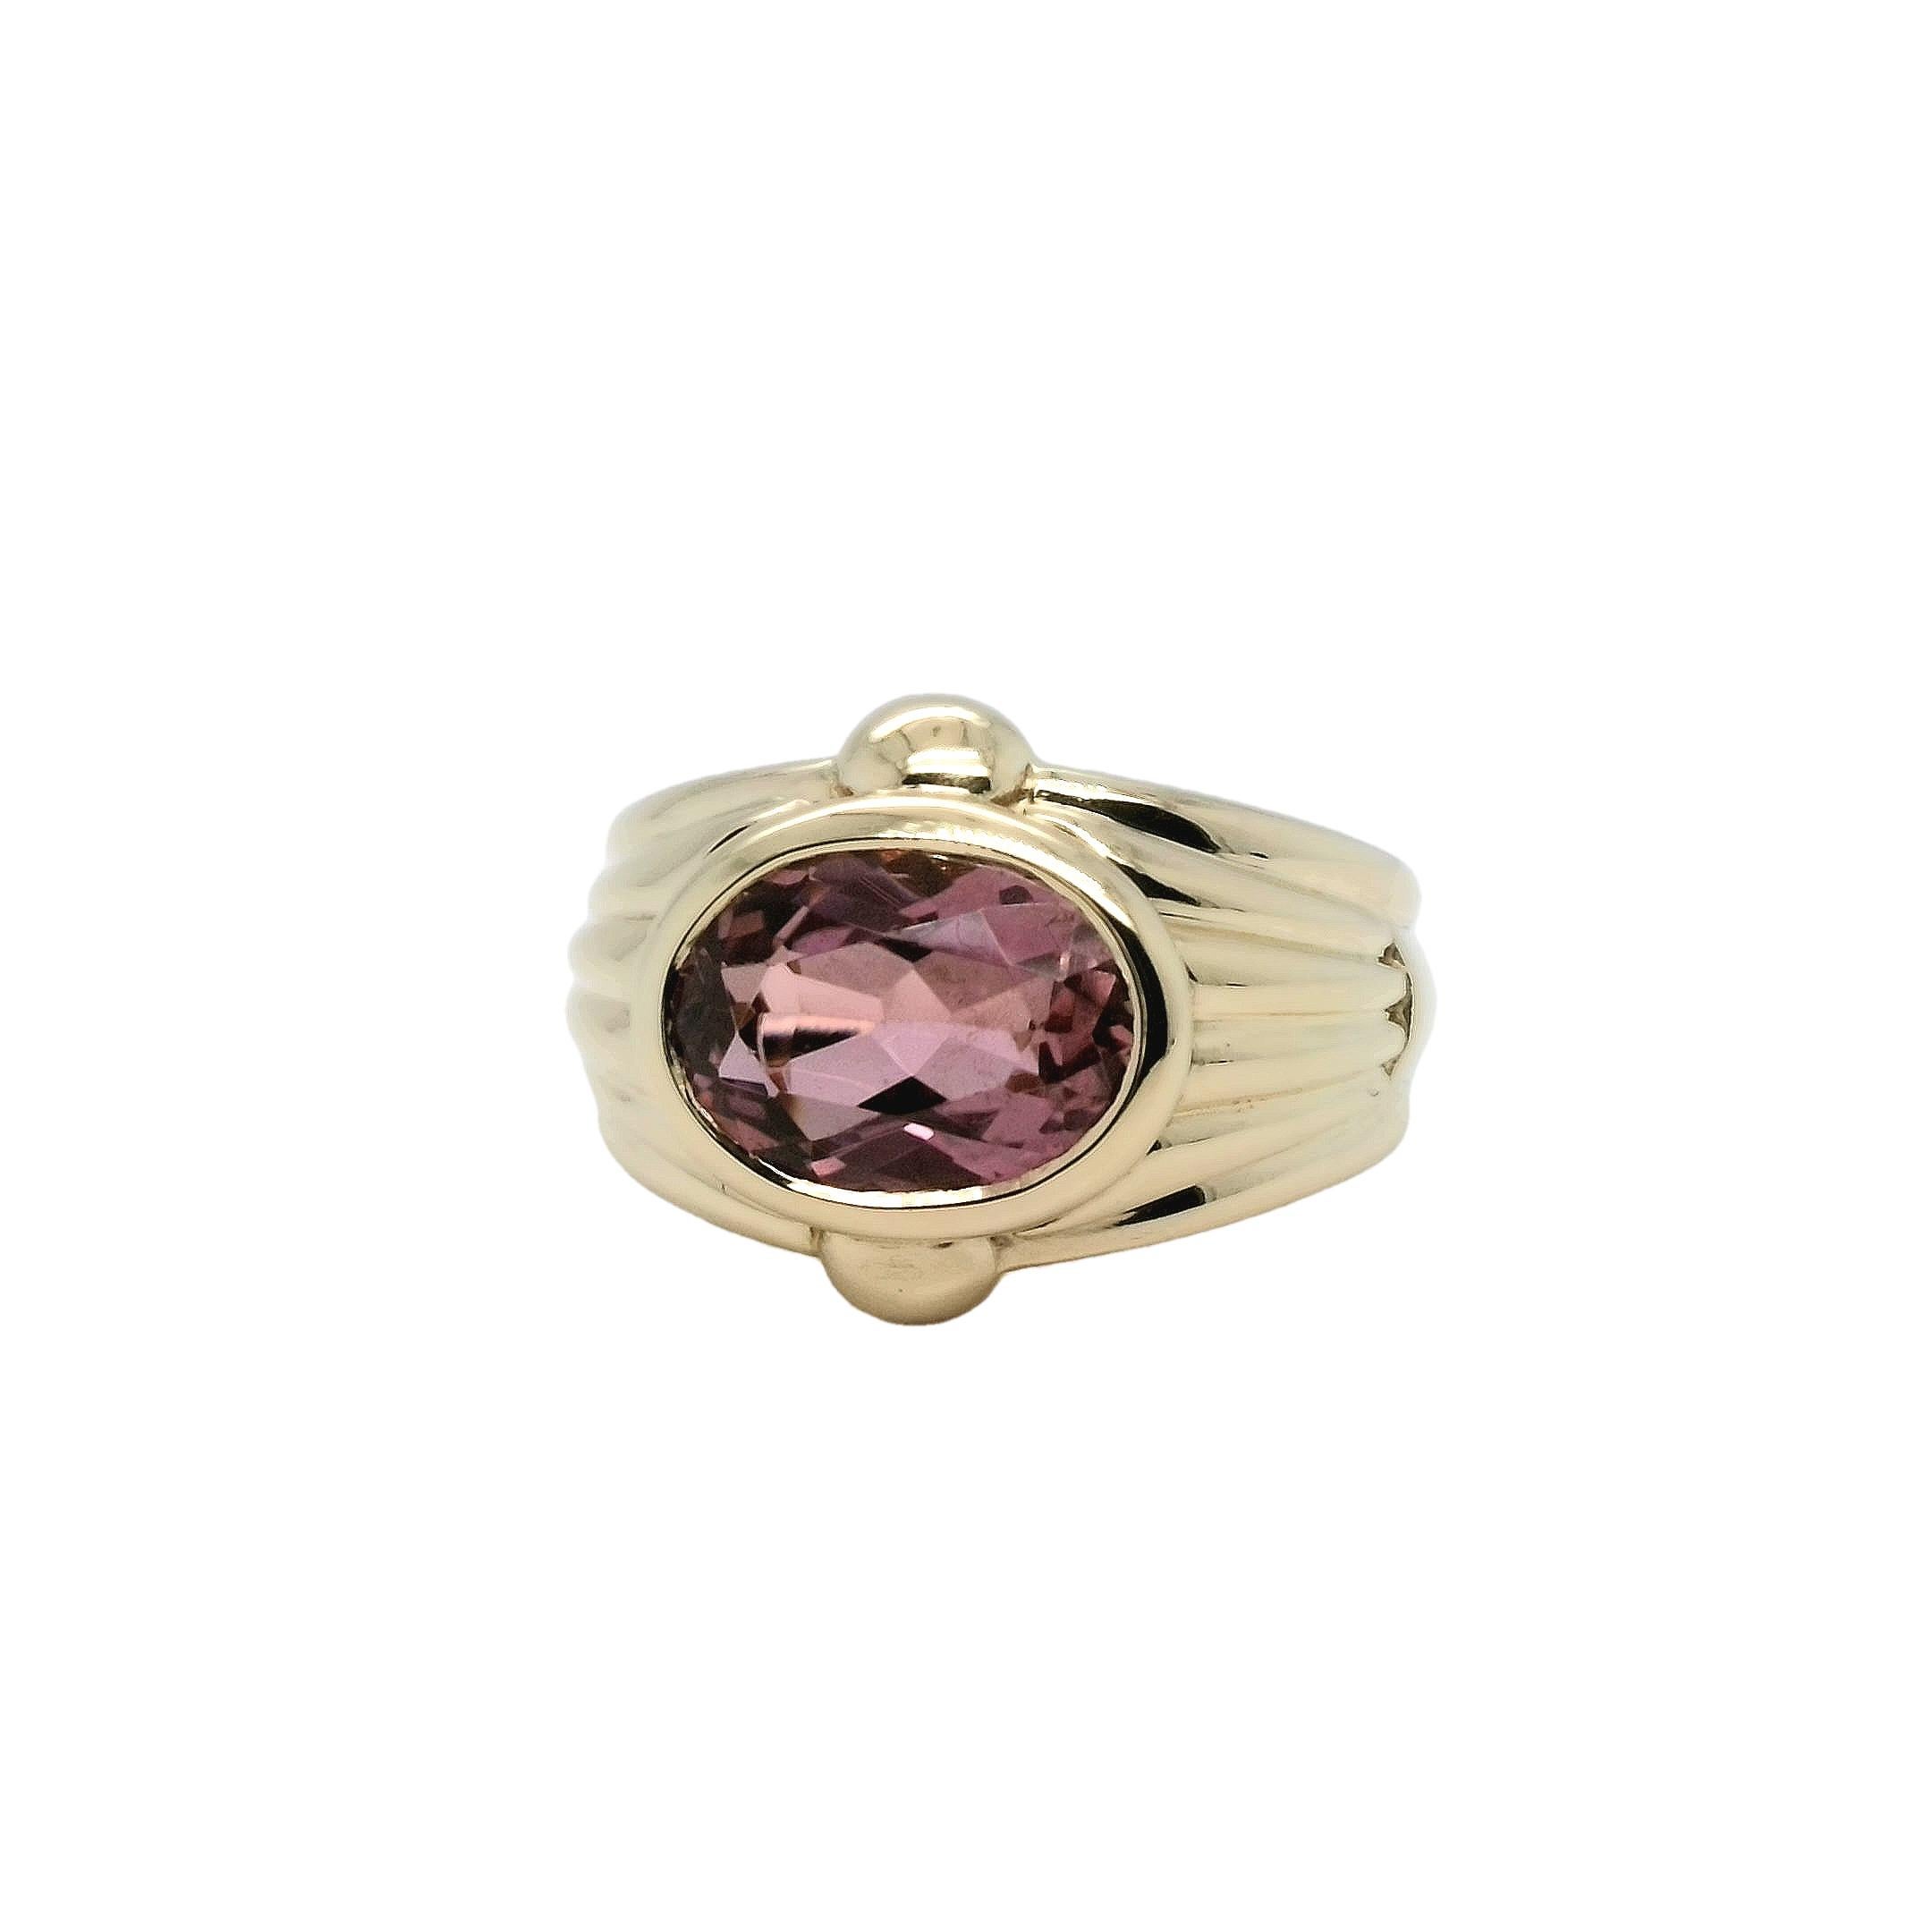 Vintage beautiful BULGARI Vintage Pink Tourmaline ring Circa 1980s

18ct yellow gold, set with an oval cut pink tourmaline of approximately 2.15 carats, signed Bulgari and numbered, stamped 750, Ring Sizes size K UK 5.25 US 50 European